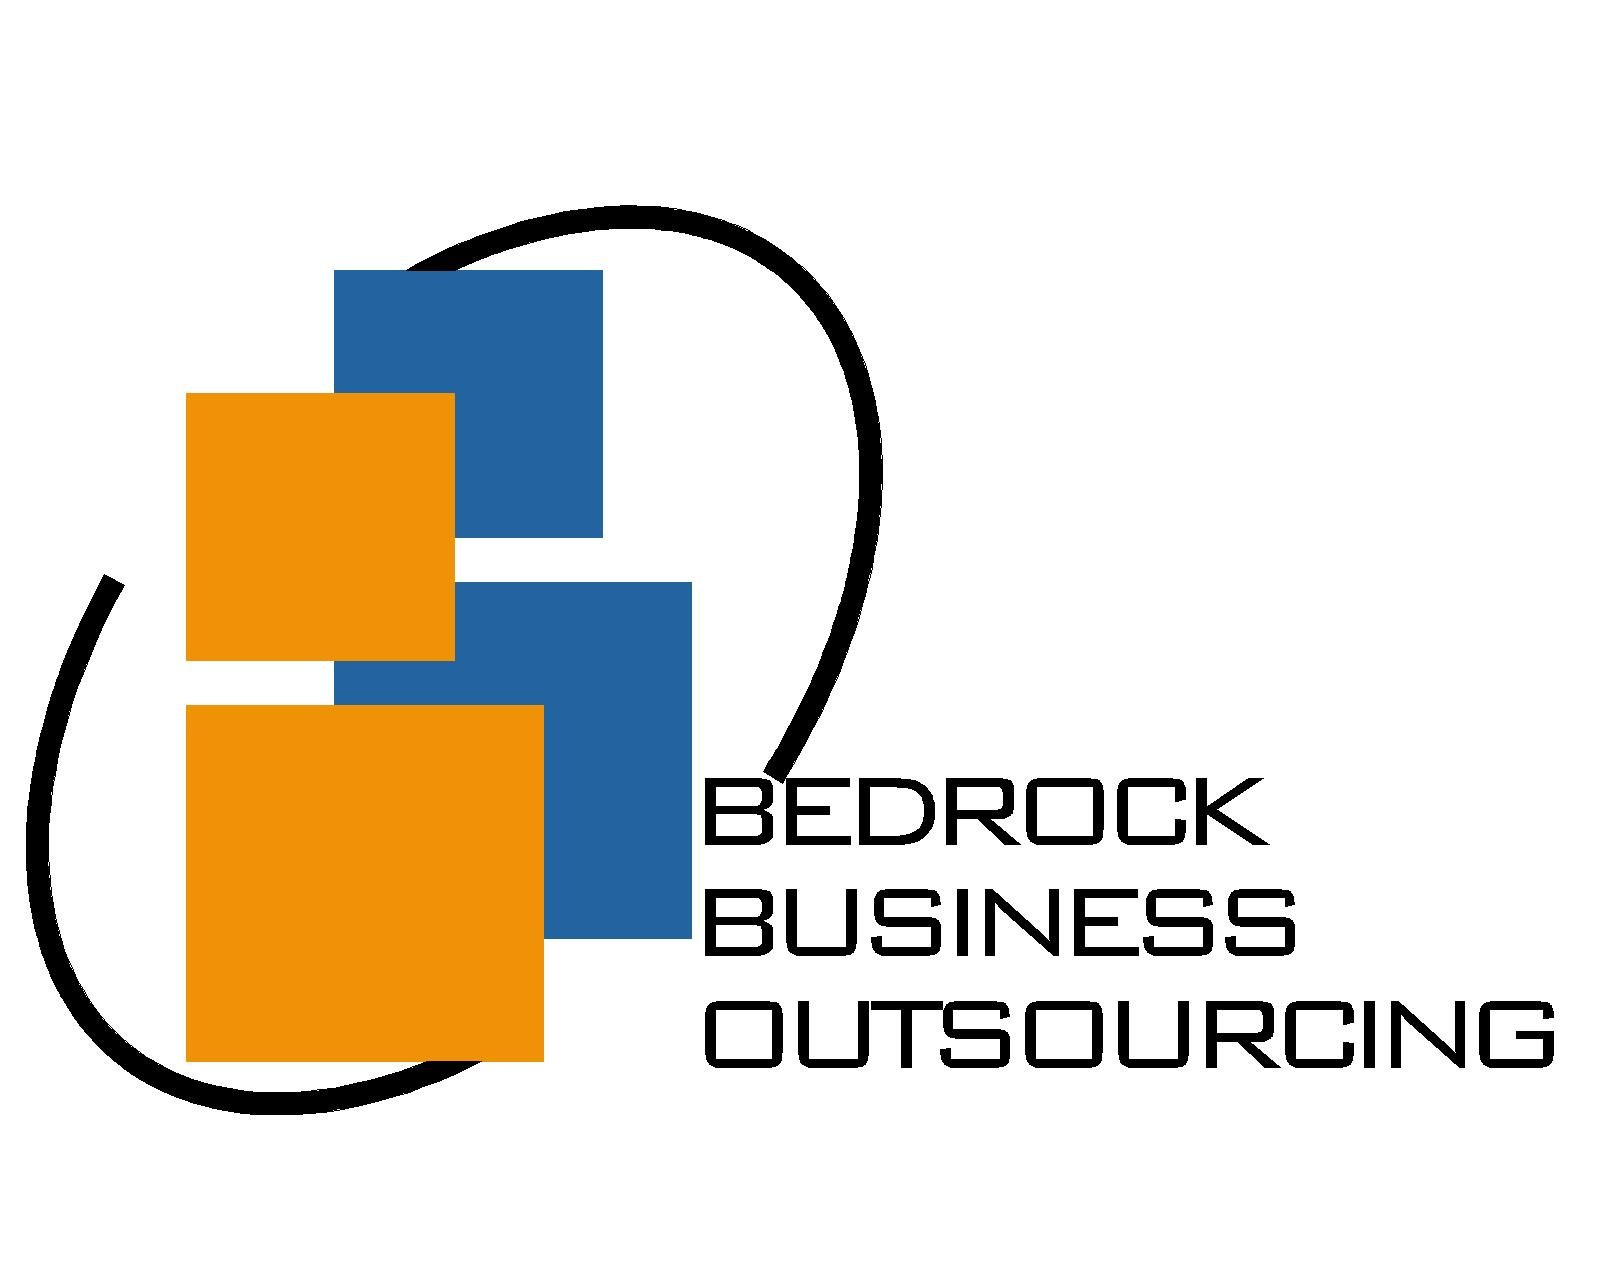 Bedrock Business Outsourcing